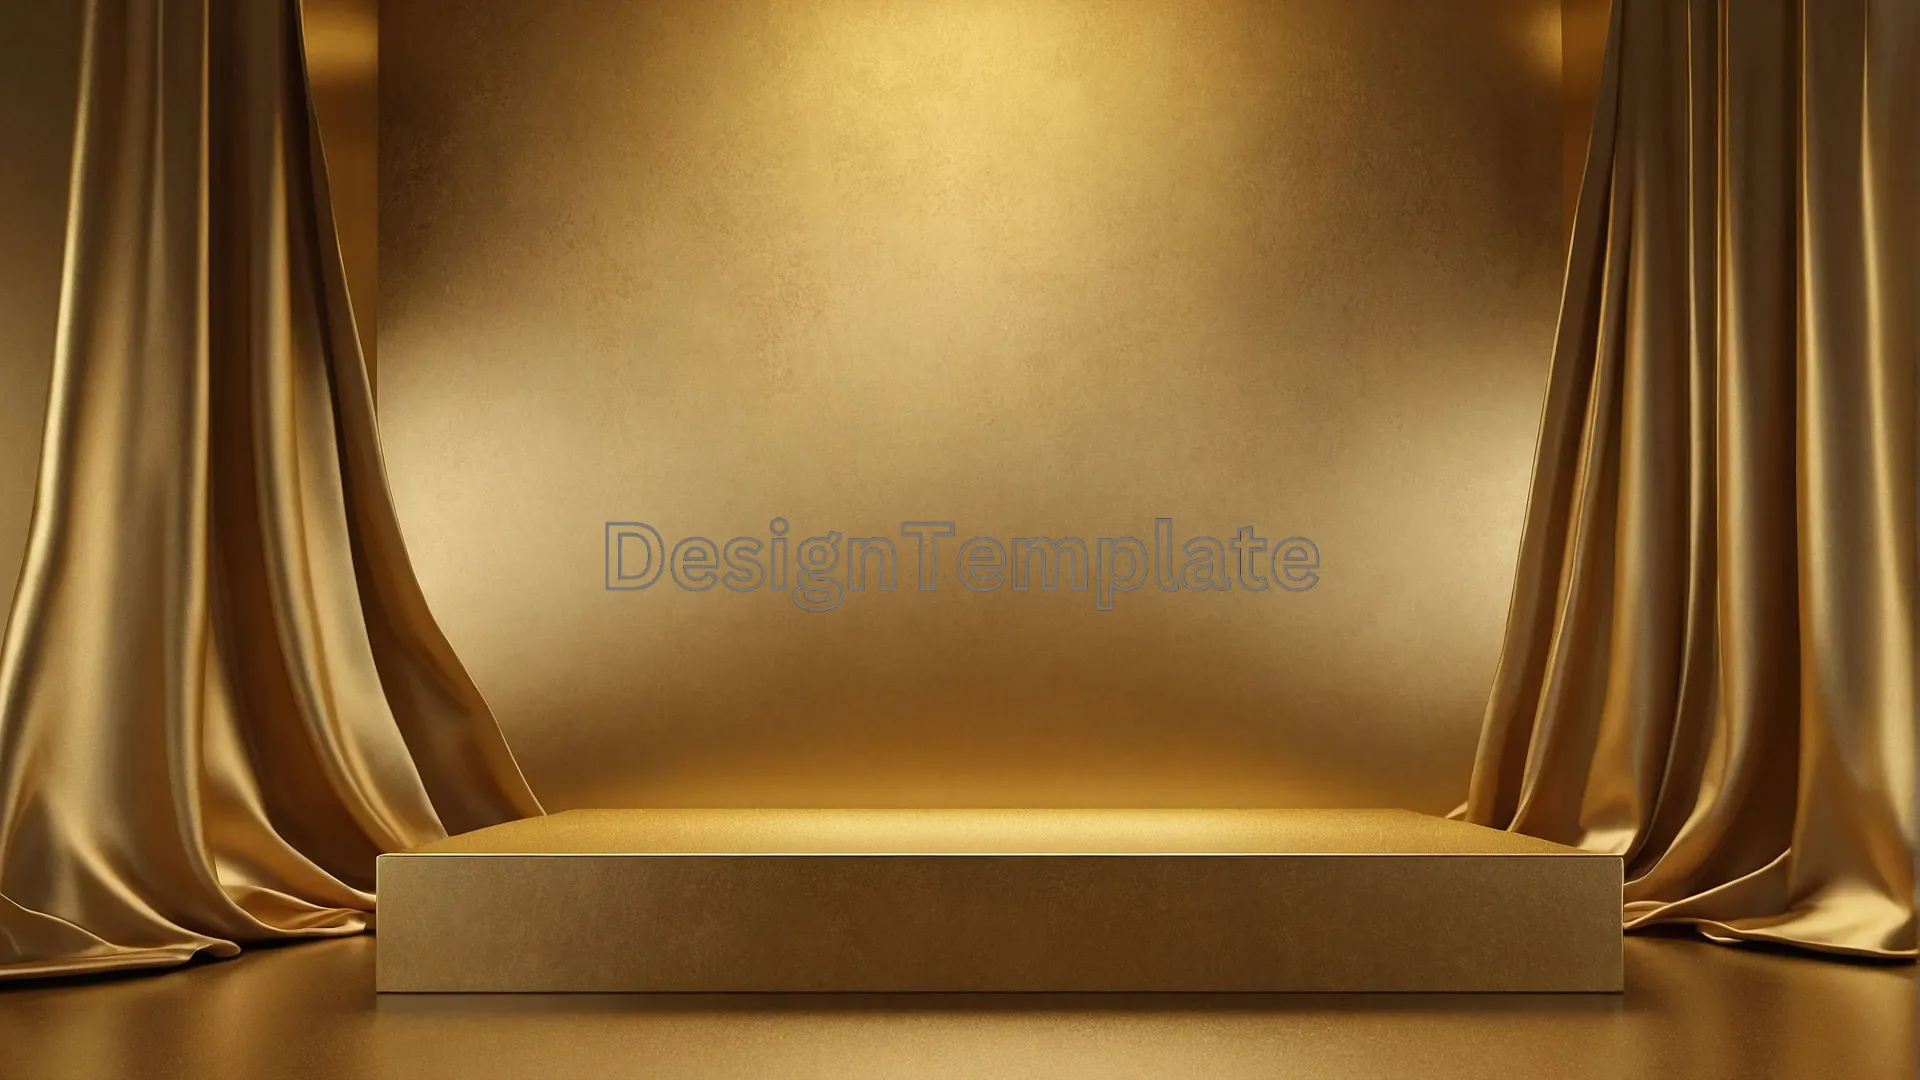 Luxurious Golden Curtains with Podium Image